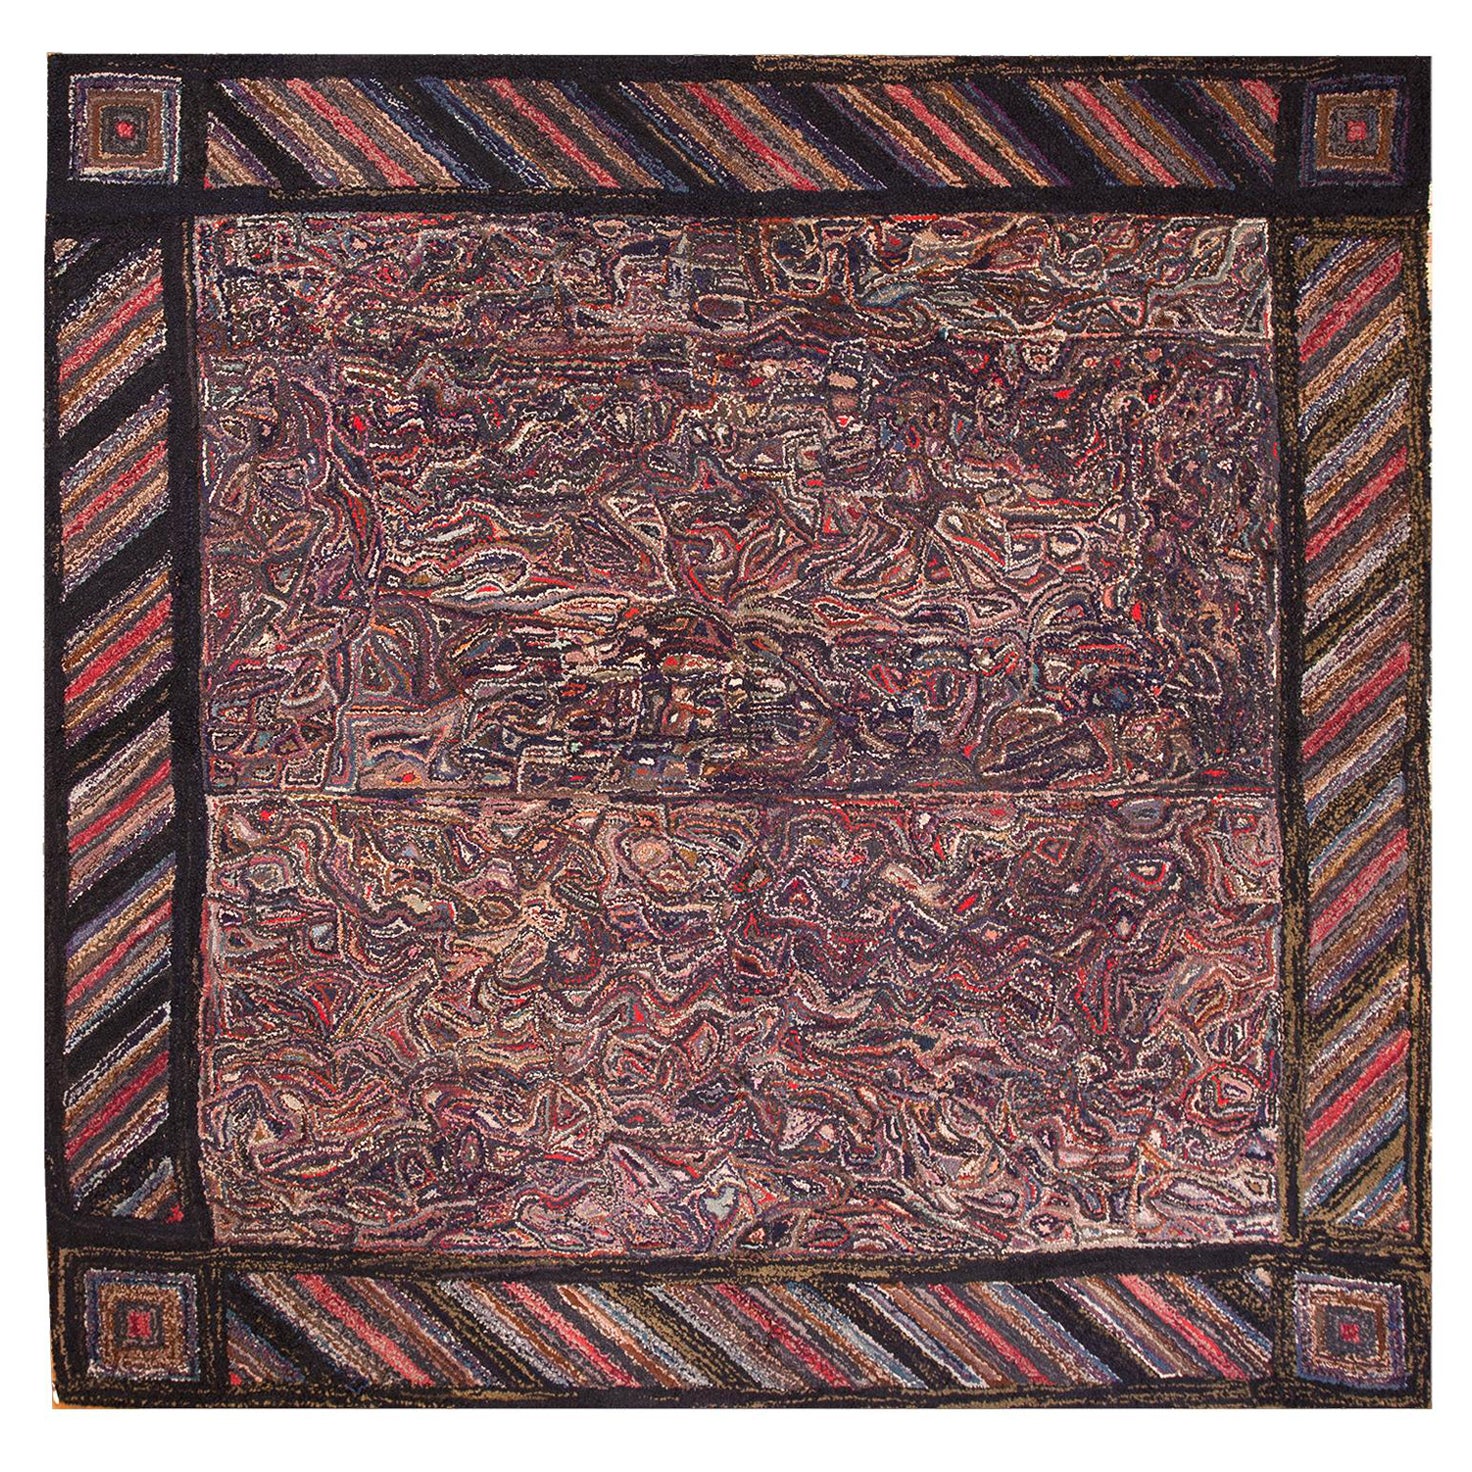 1930s Abstract Design American Hooked Rug ( 9'2" x 9'2" - 280 x 280 cm )